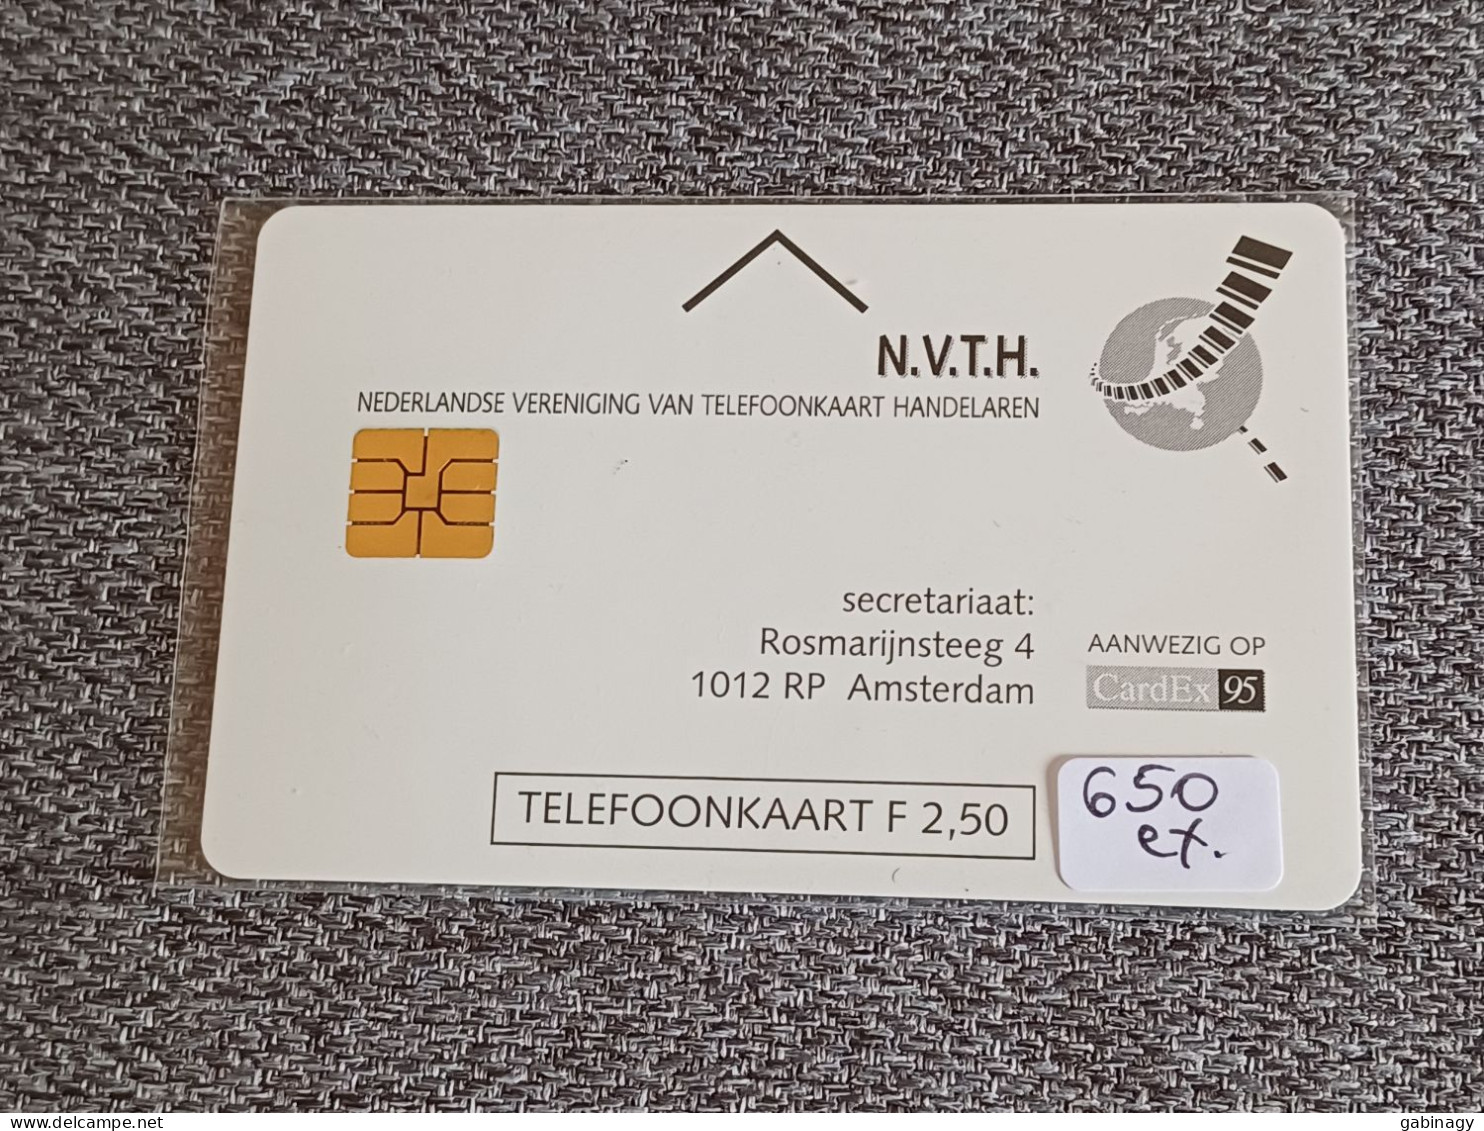 NETHERLANDS - CRD139 - CARDEX 95 - 650 EX. - Private